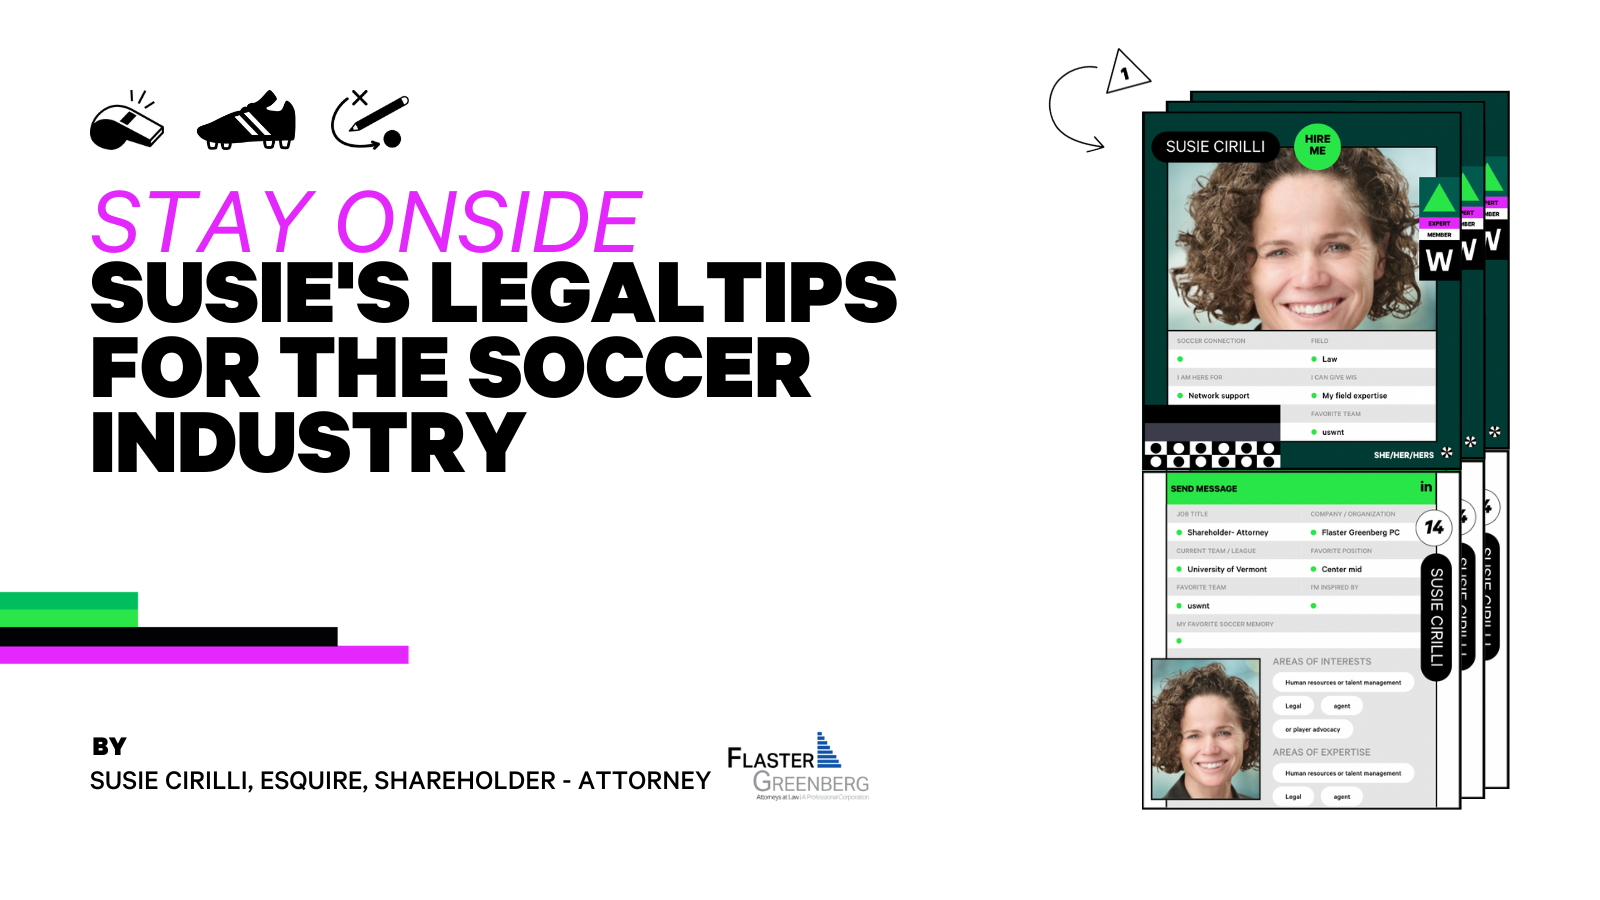 SUSIE’S LEGAL TIPS FOR THE SOCCER INDUSTRY